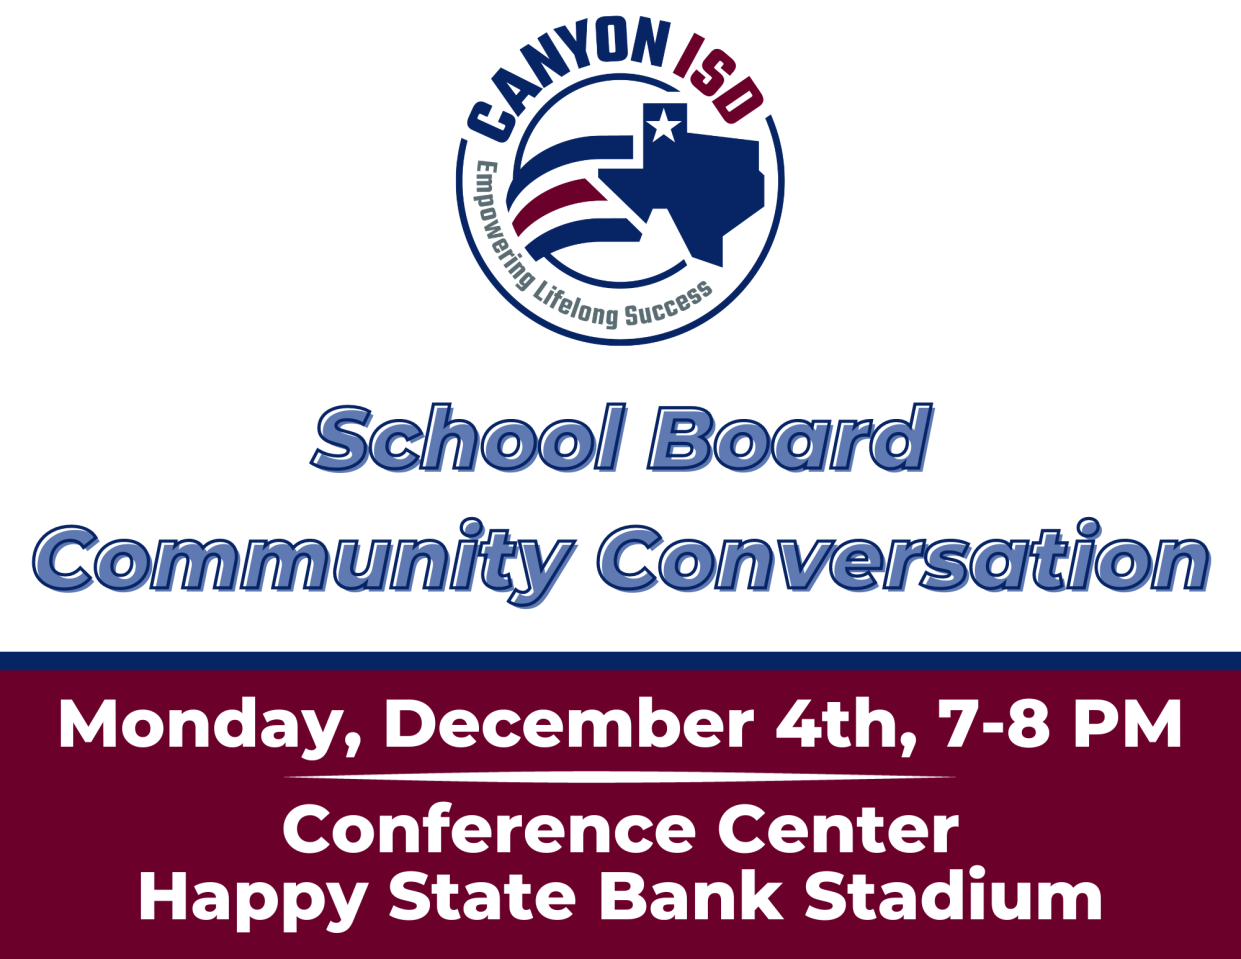 The Canyon Independent School District's Board of Trustees will hold is first CISD Community Conversation event at the Conference Center at Happy State Bank Stadium on Monday.